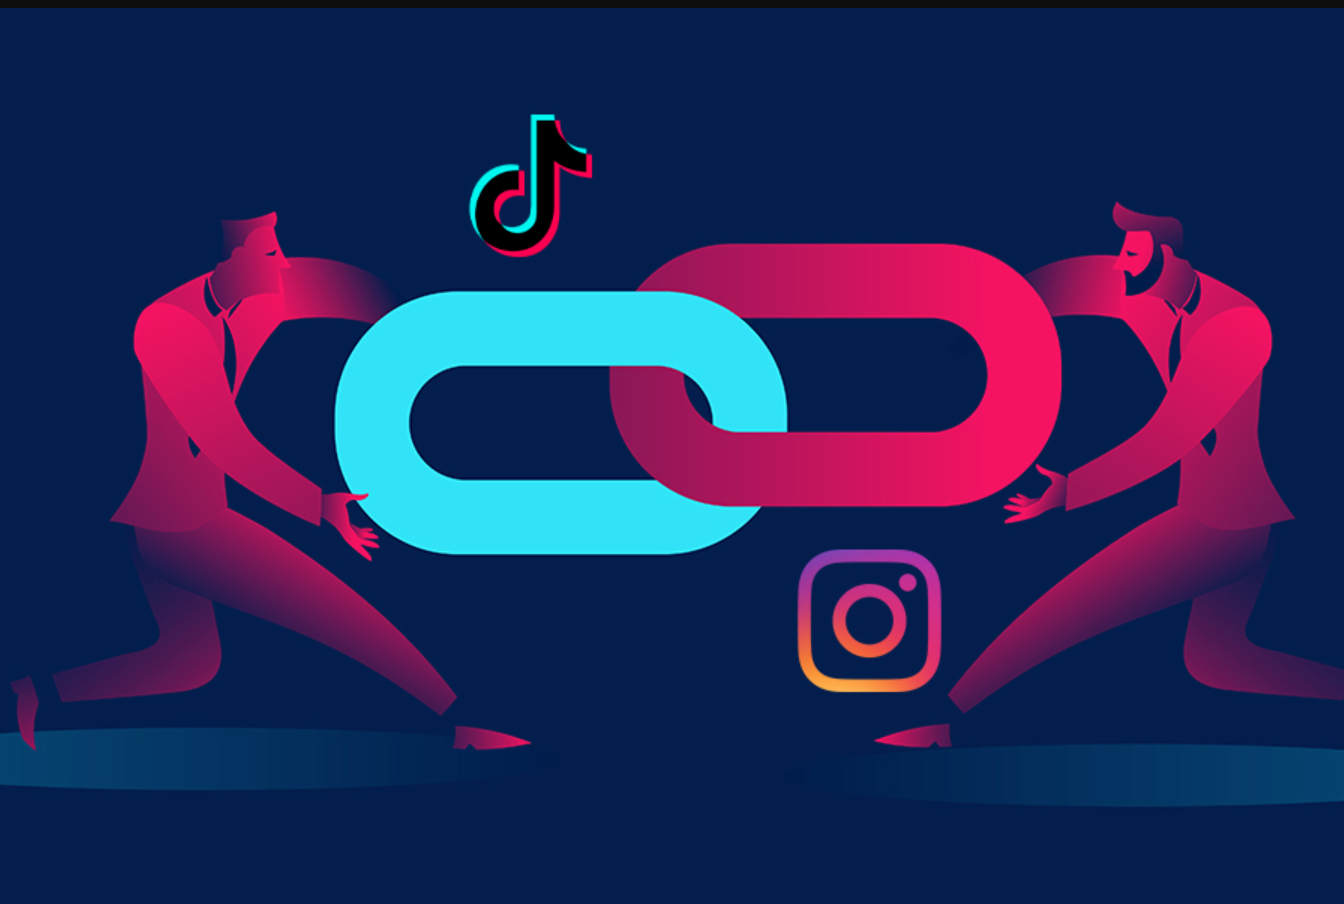 How to link Instagram to TikTok in 4 easy steps. This article will teach you how to connect your accounts and share your videos across both platforms.